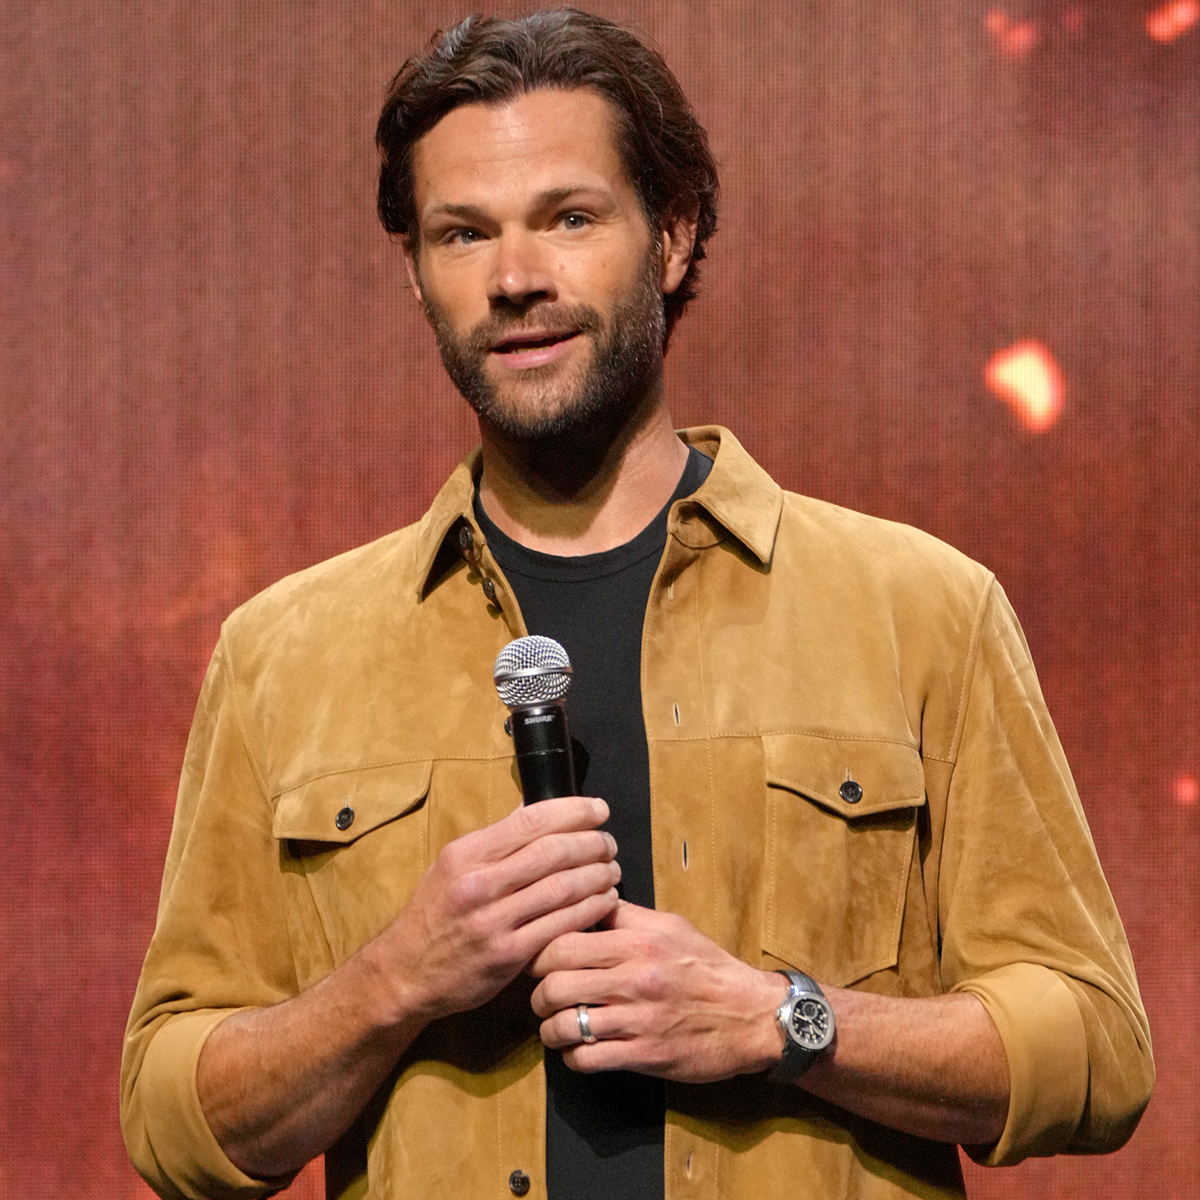 Jared Padalecki Shares How He Overcame Struggle With Suicidal Ideation